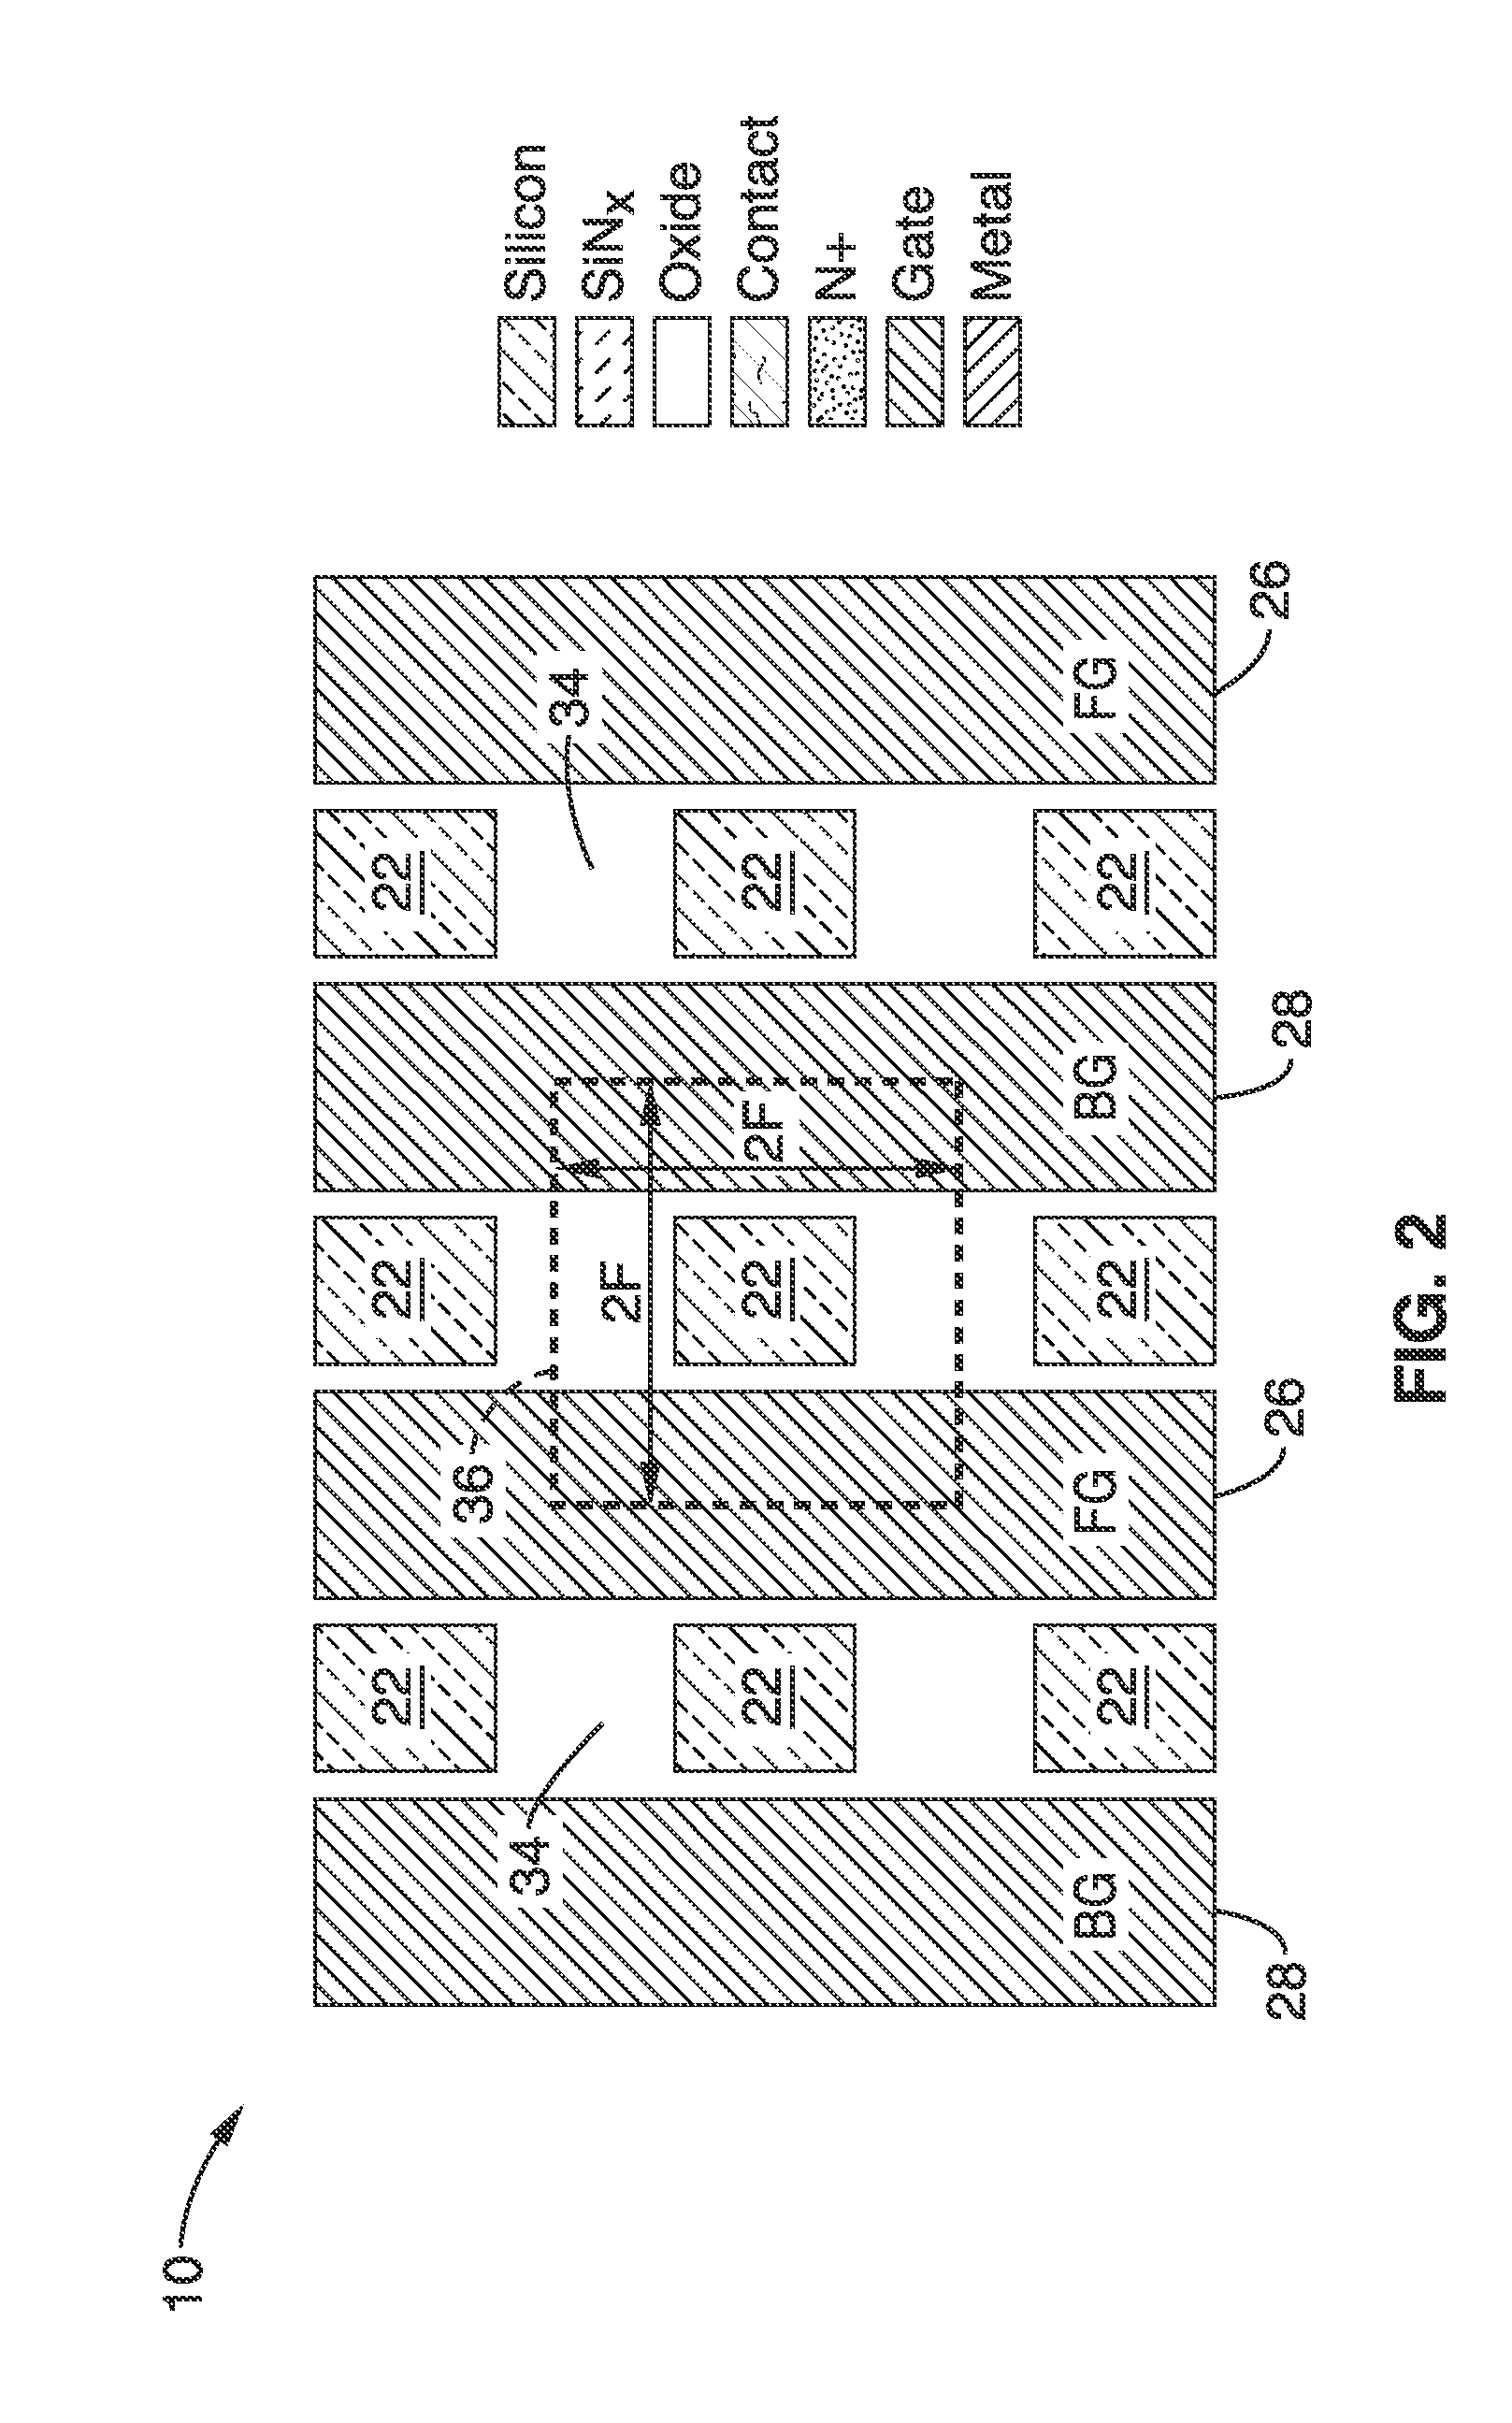 Dram cell utilizing a doubly gated vertical channel